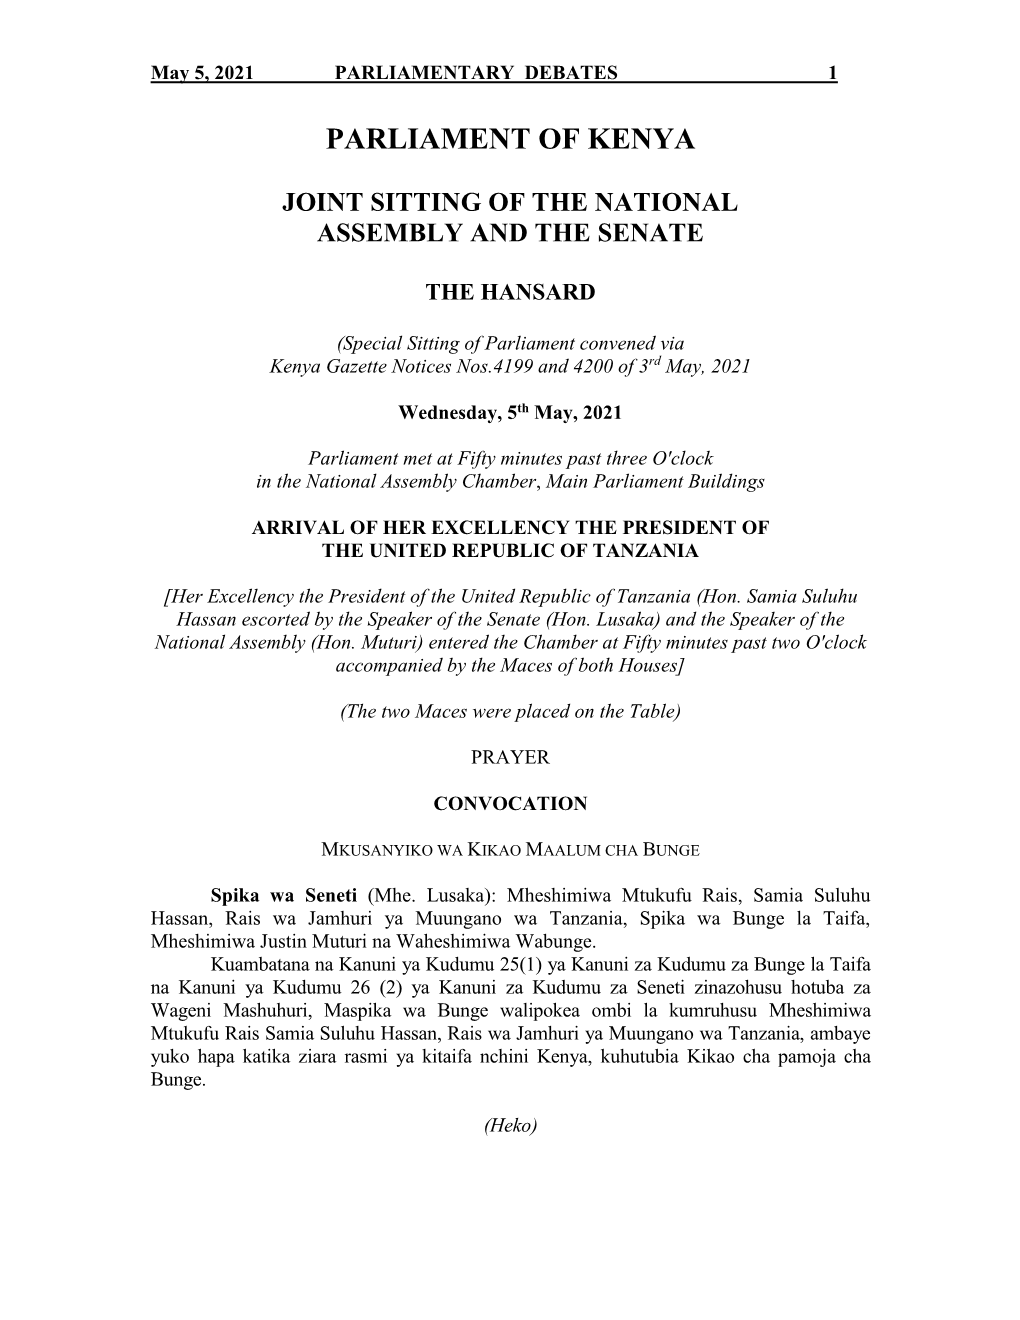 Joint Sitting of the National Assembly and the Senate